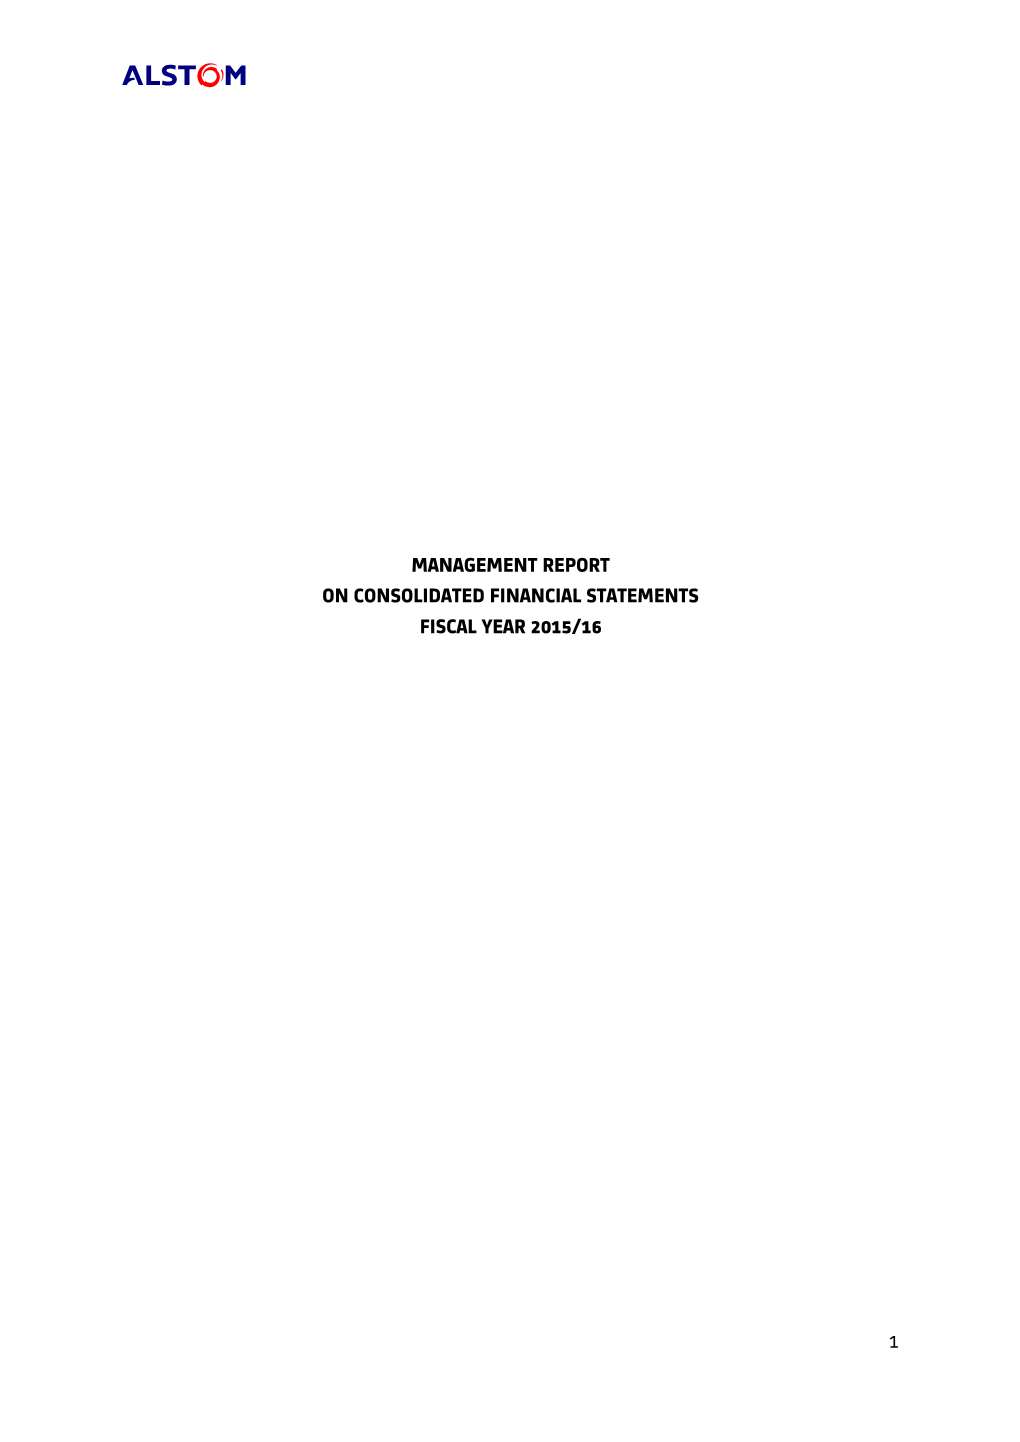 Management Report on Consolidated Financial Statements Fiscal Year 2015/16